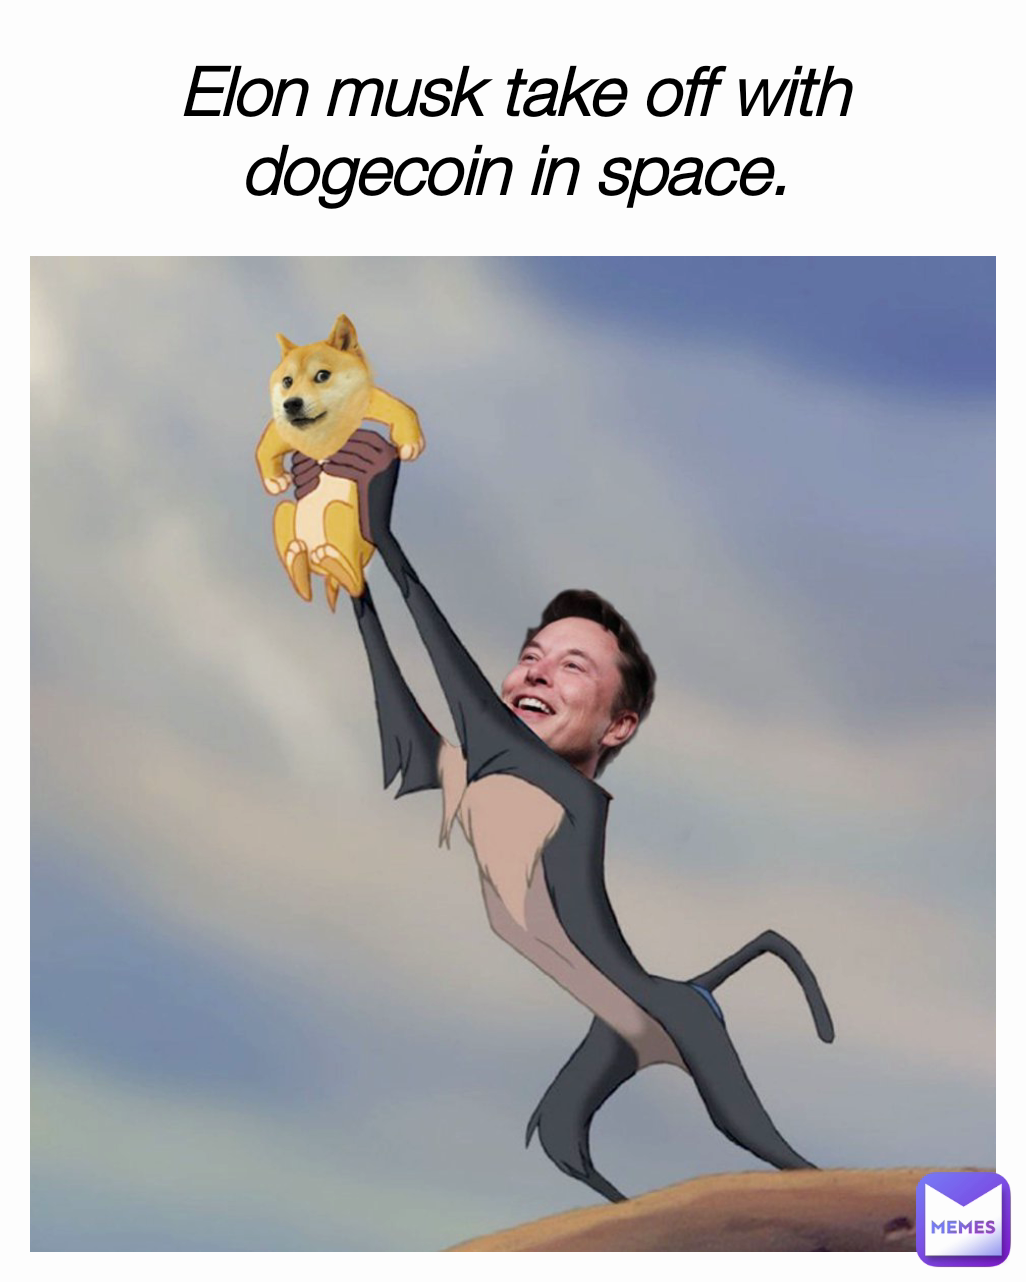 Elon musk take off with dogecoin in space.